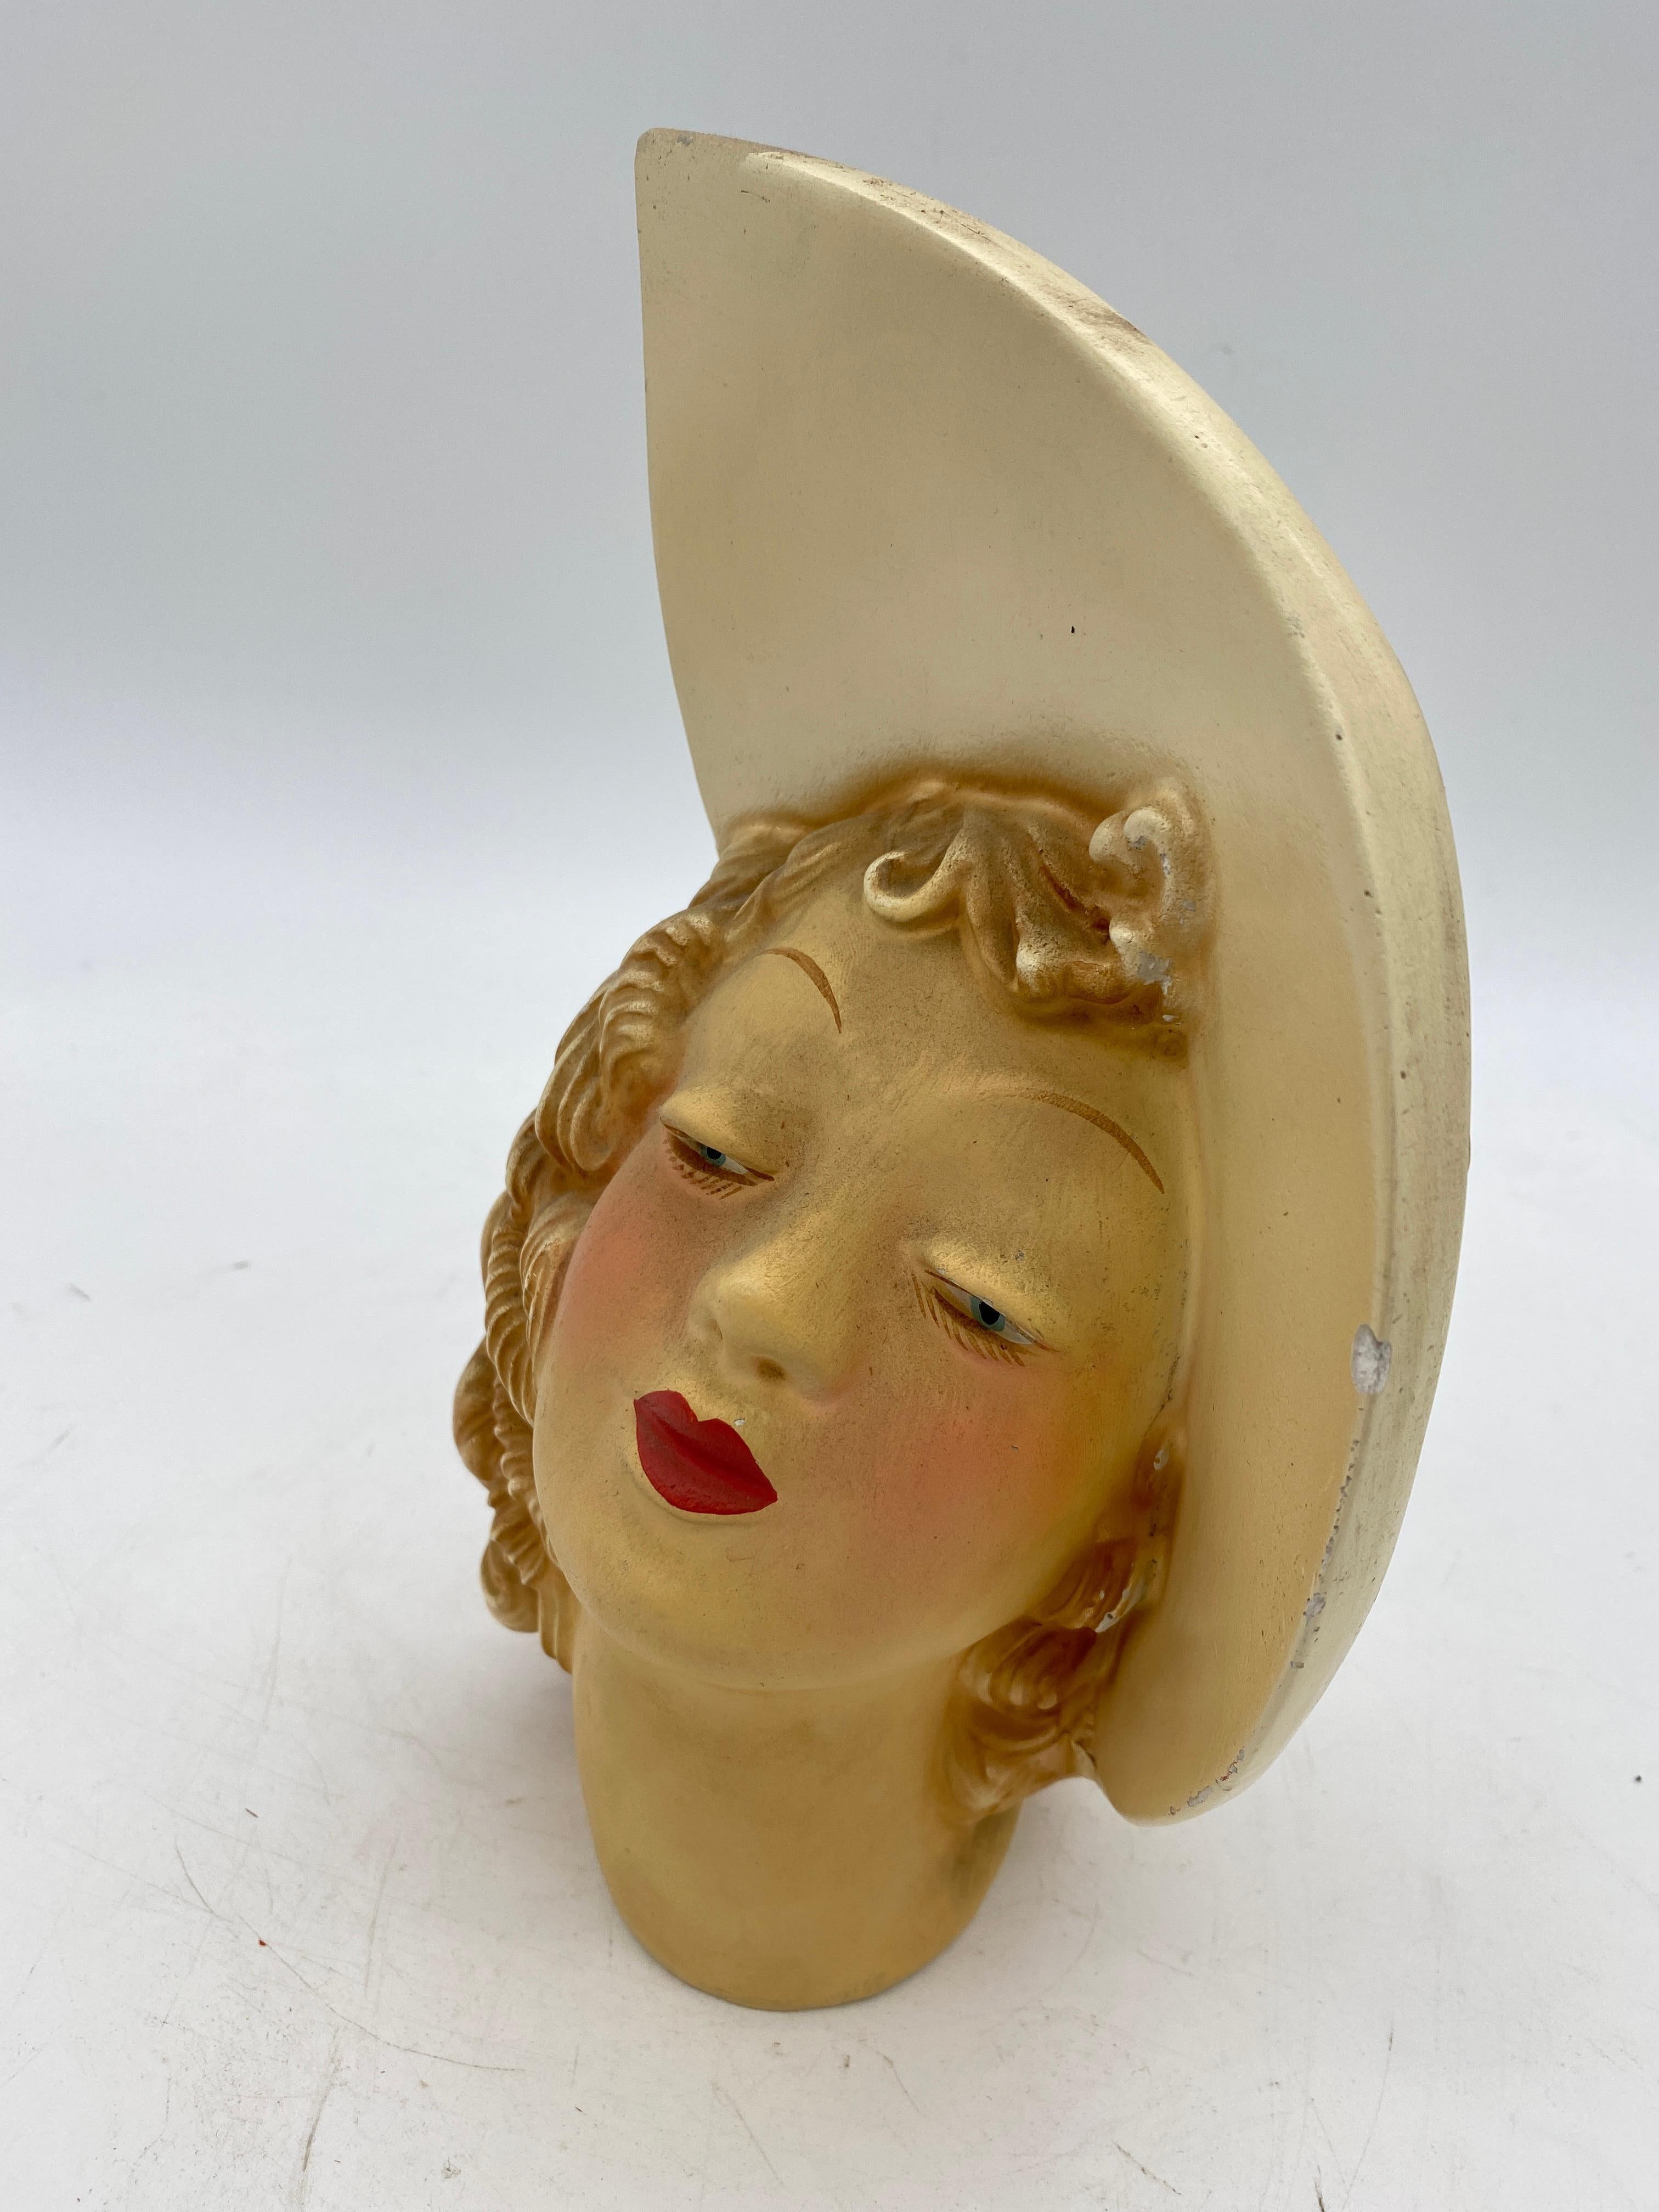 Post-War Resin Planter Beauty Female Bust featuring a beautiful bust of a young woman in a Sunday hat. the planter comes with a glass insert for the plant to ensure easy cleaning.